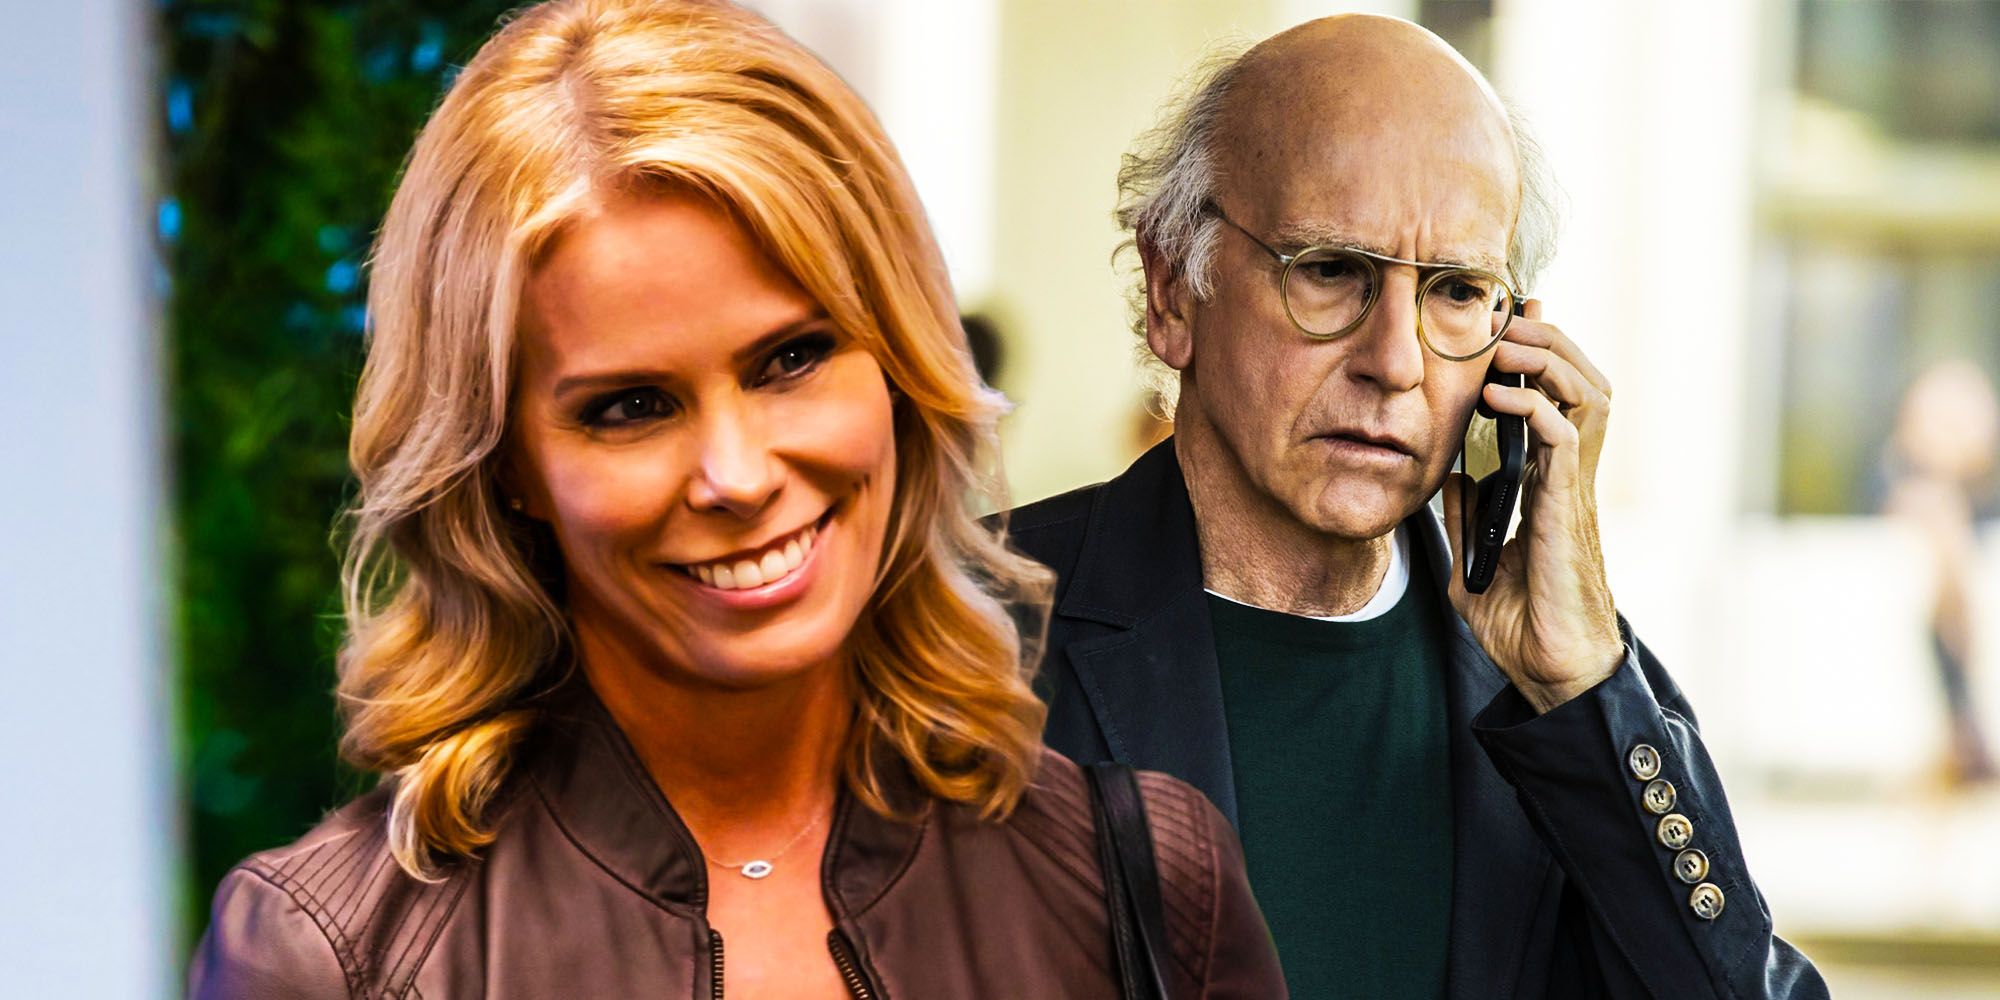 Curb your enthusiasm Larry and cheryl divorce saved the show